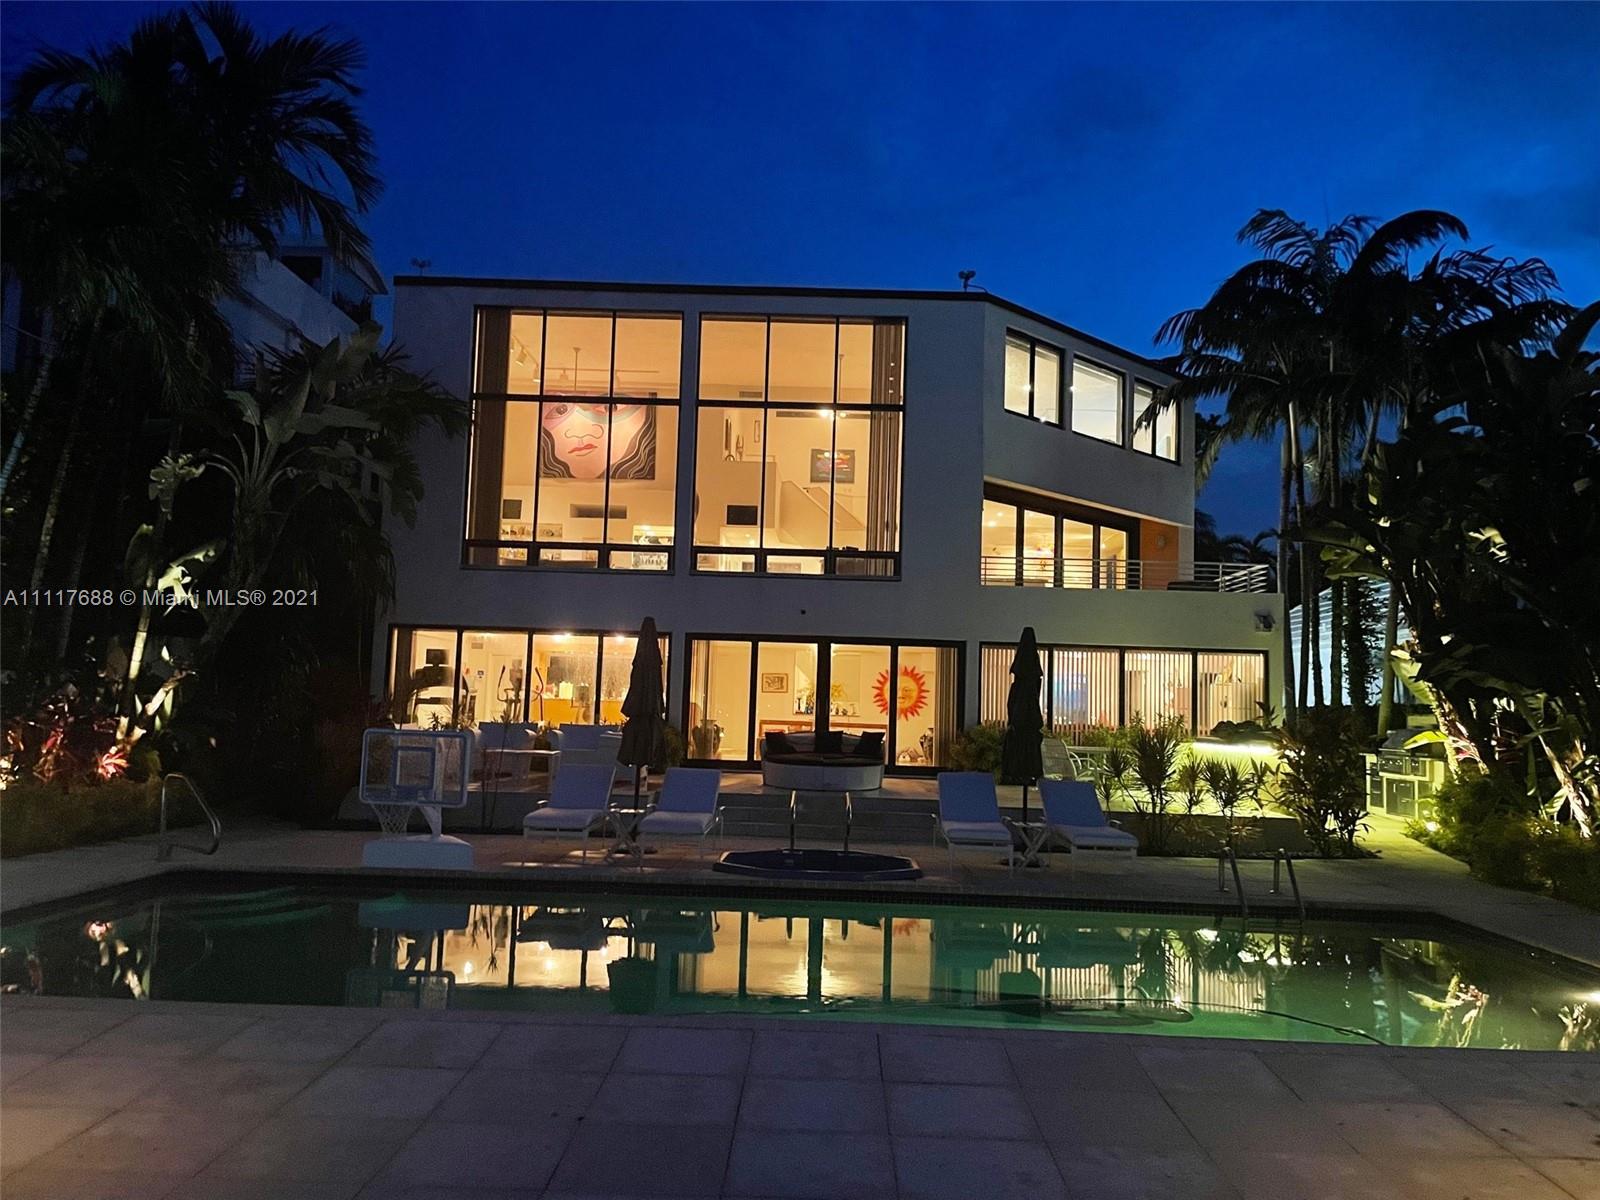 A dramatic custom built architect’s waterfront 3 story timeless custom gem featured on Miami Vice and in the Miami Herald. House features 35 foot skylight atrium, 33 ft. wide 2 story high living room with 15 foot high windows.5 bedroom, 5 1/2 bath overlooking the wide bay. A grand residence. Interested parties must be pre-qualified before showing. Showing is by appointment with 24 hour notice.